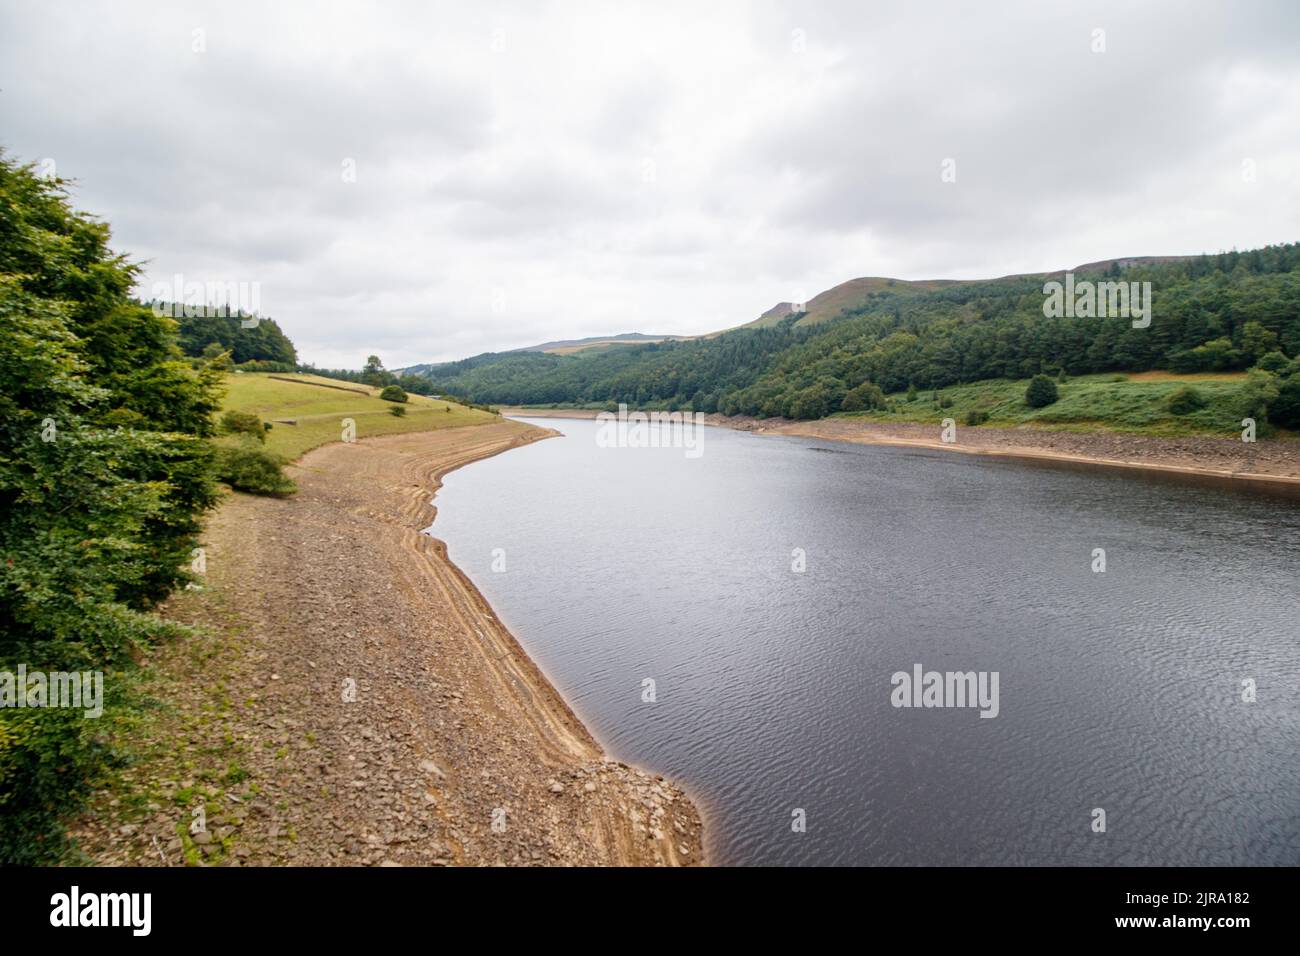 The Ladybower reservoir during the dry and drought weather in the summer of 2022. Ladybower Reservoir is a large Y-shaped, artificial reservoir, the lowest of three in the Upper Derwent Valley in Derbyshire, England. Stock Photo